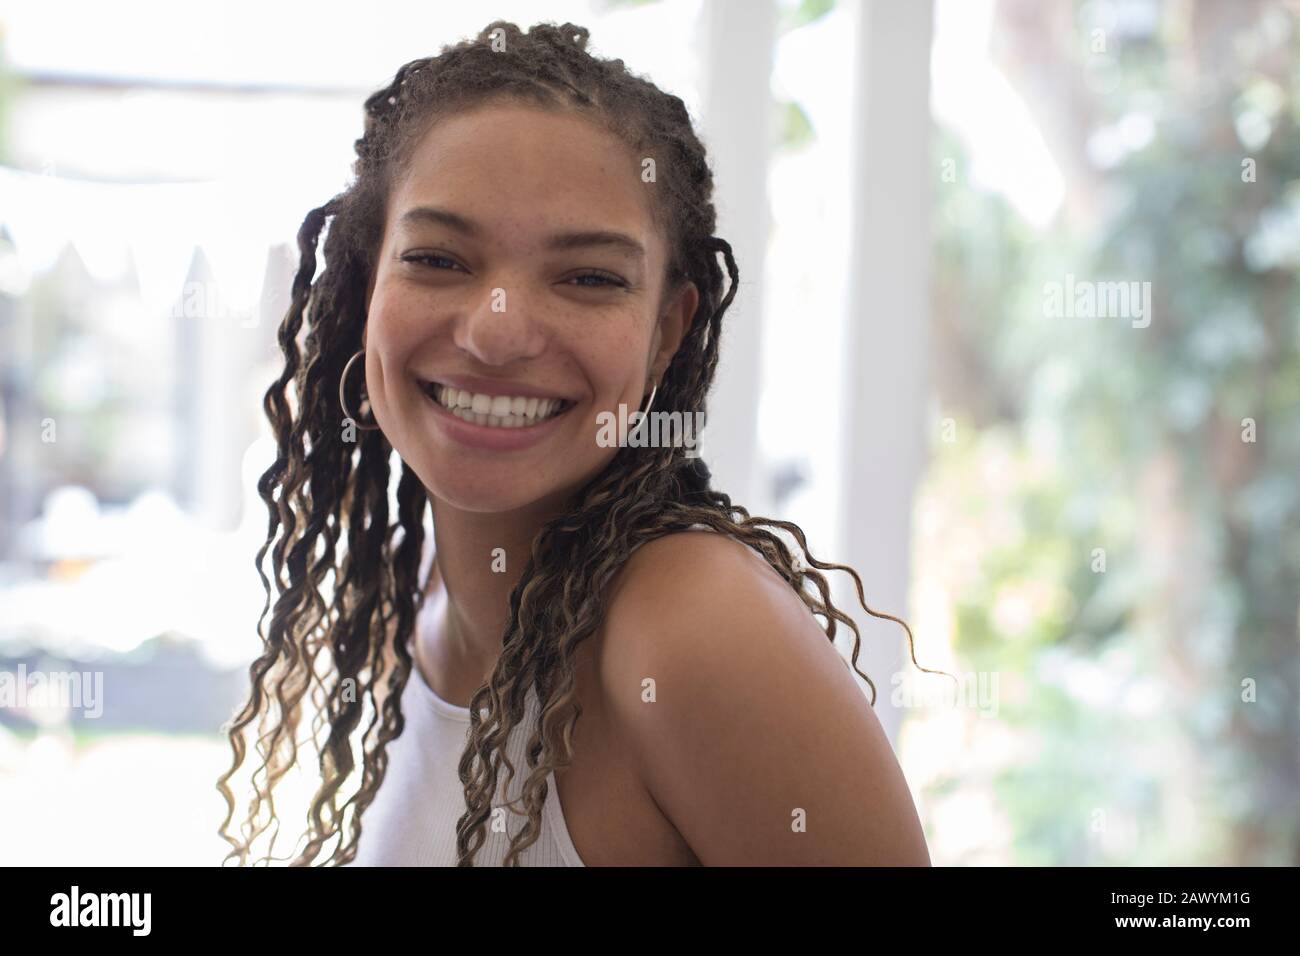 Portrait beautiful enthusiastic young woman smiling Stock Photo